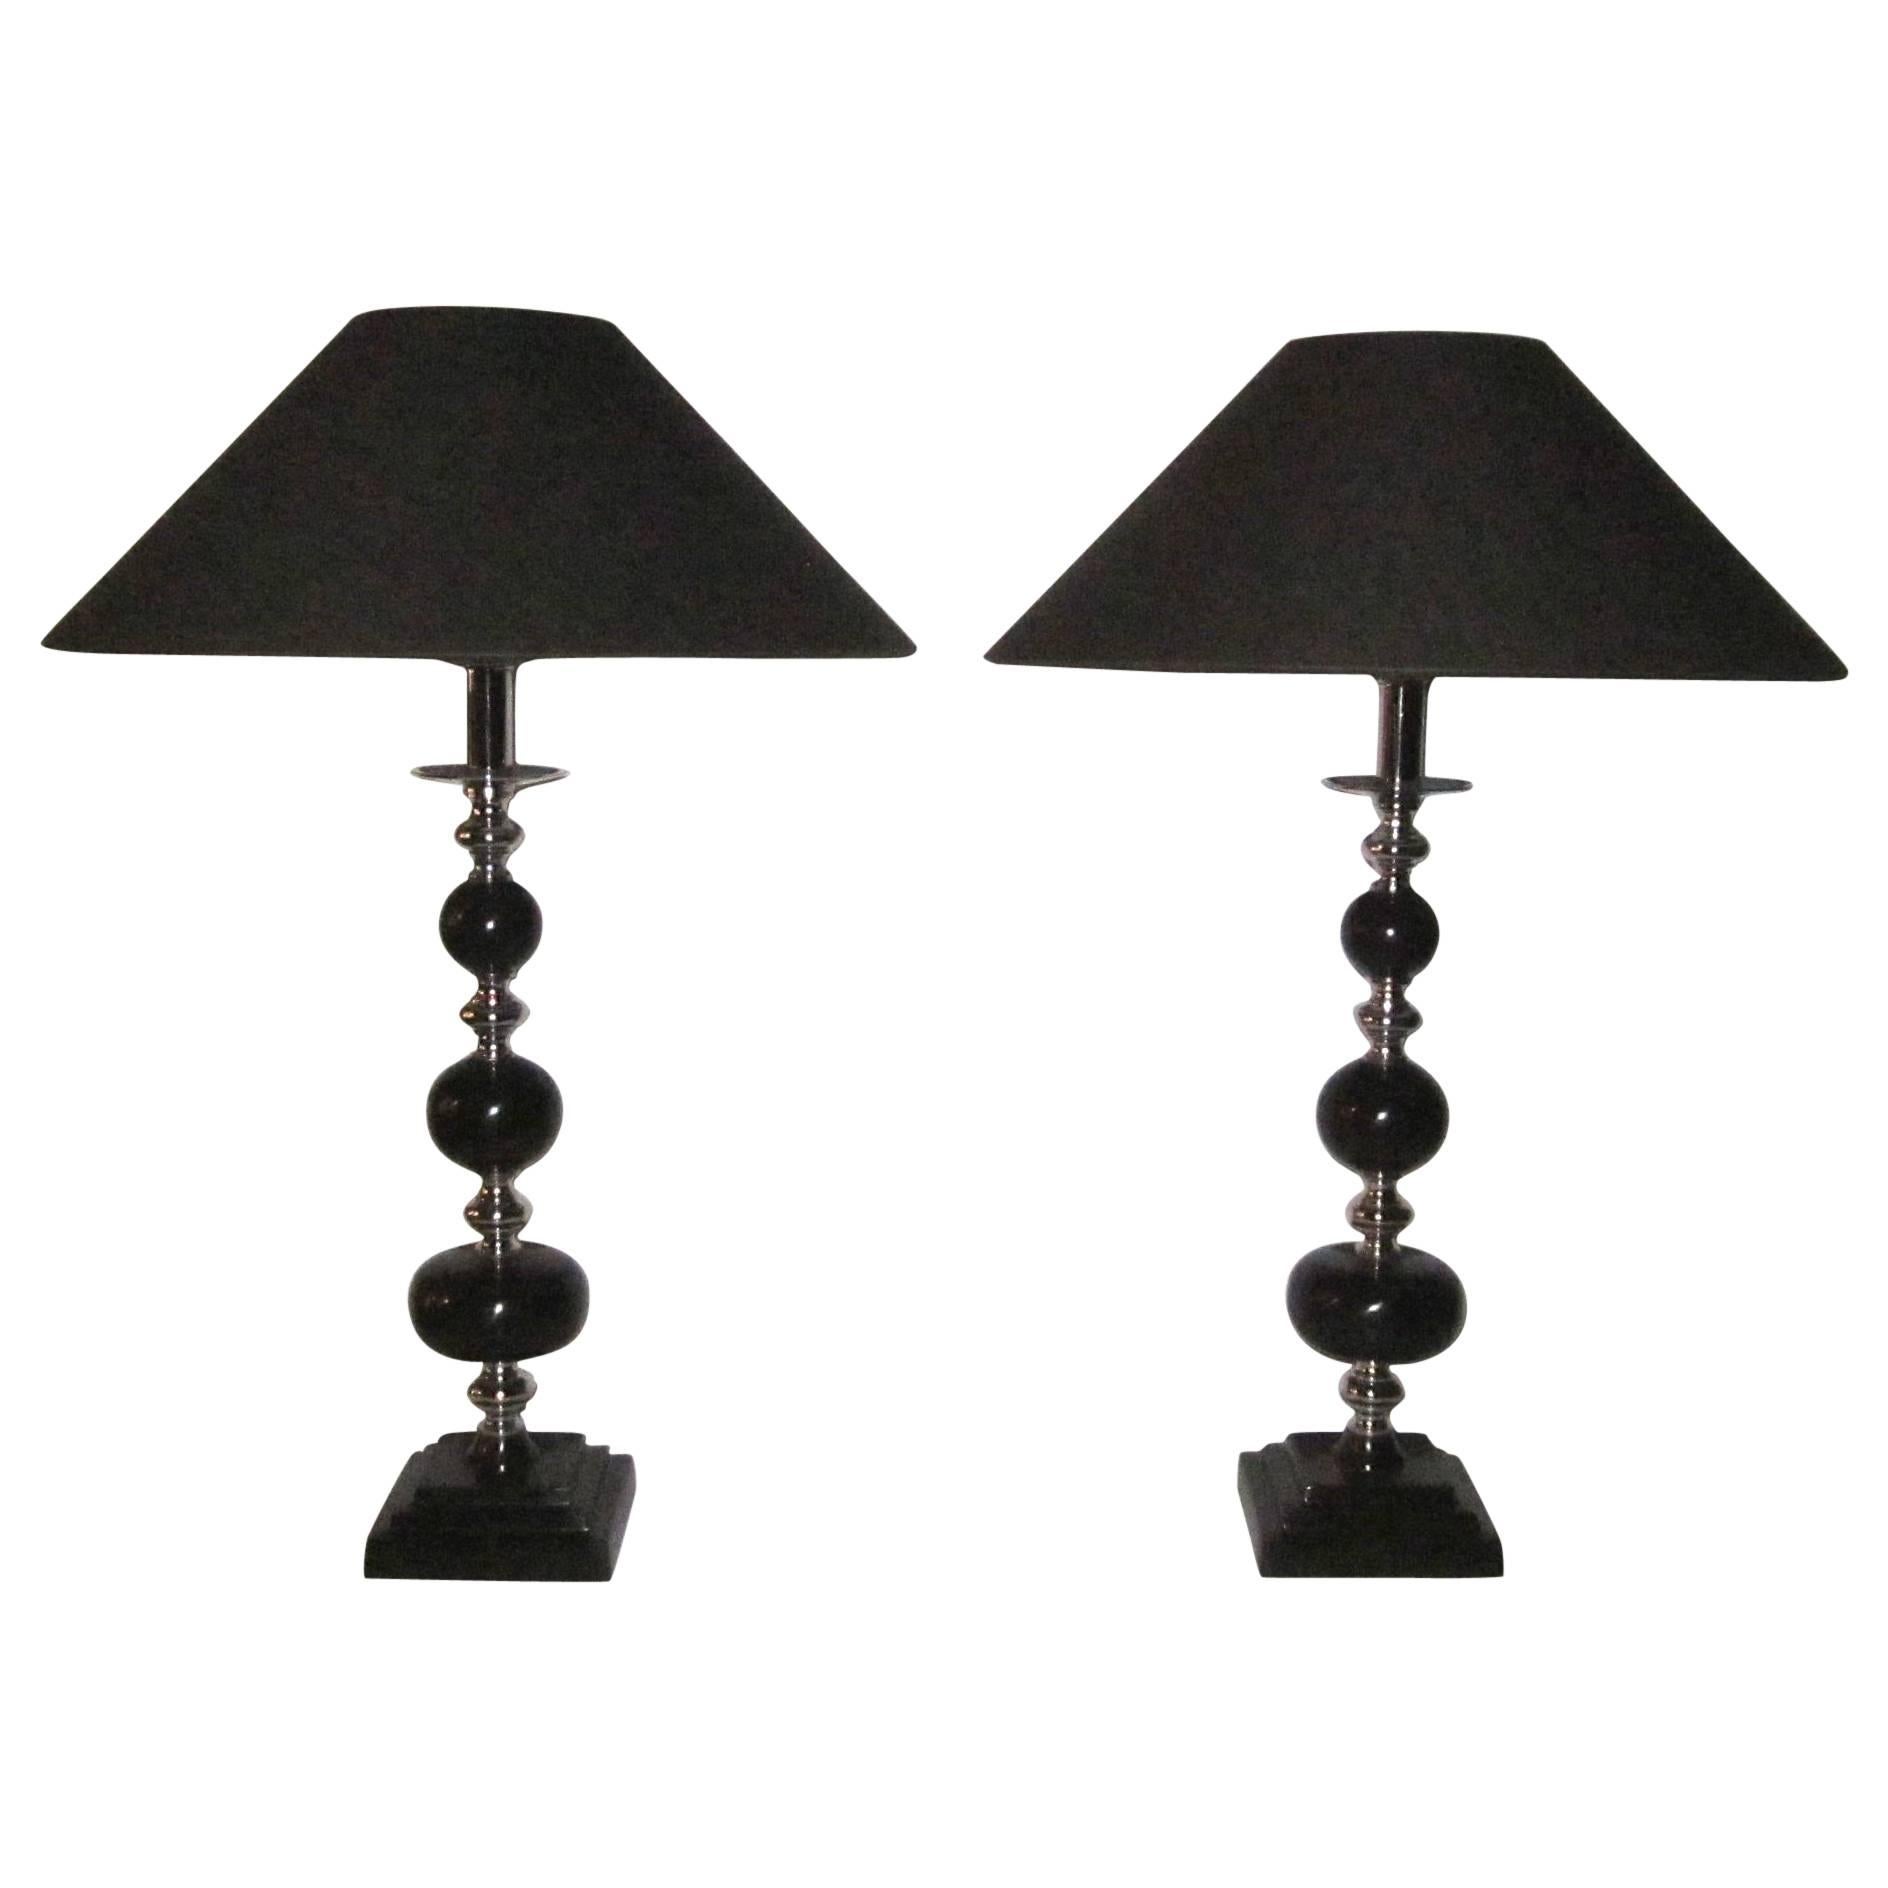 Pair of Bakelite and Chrome Ball Lamps, Contemporary